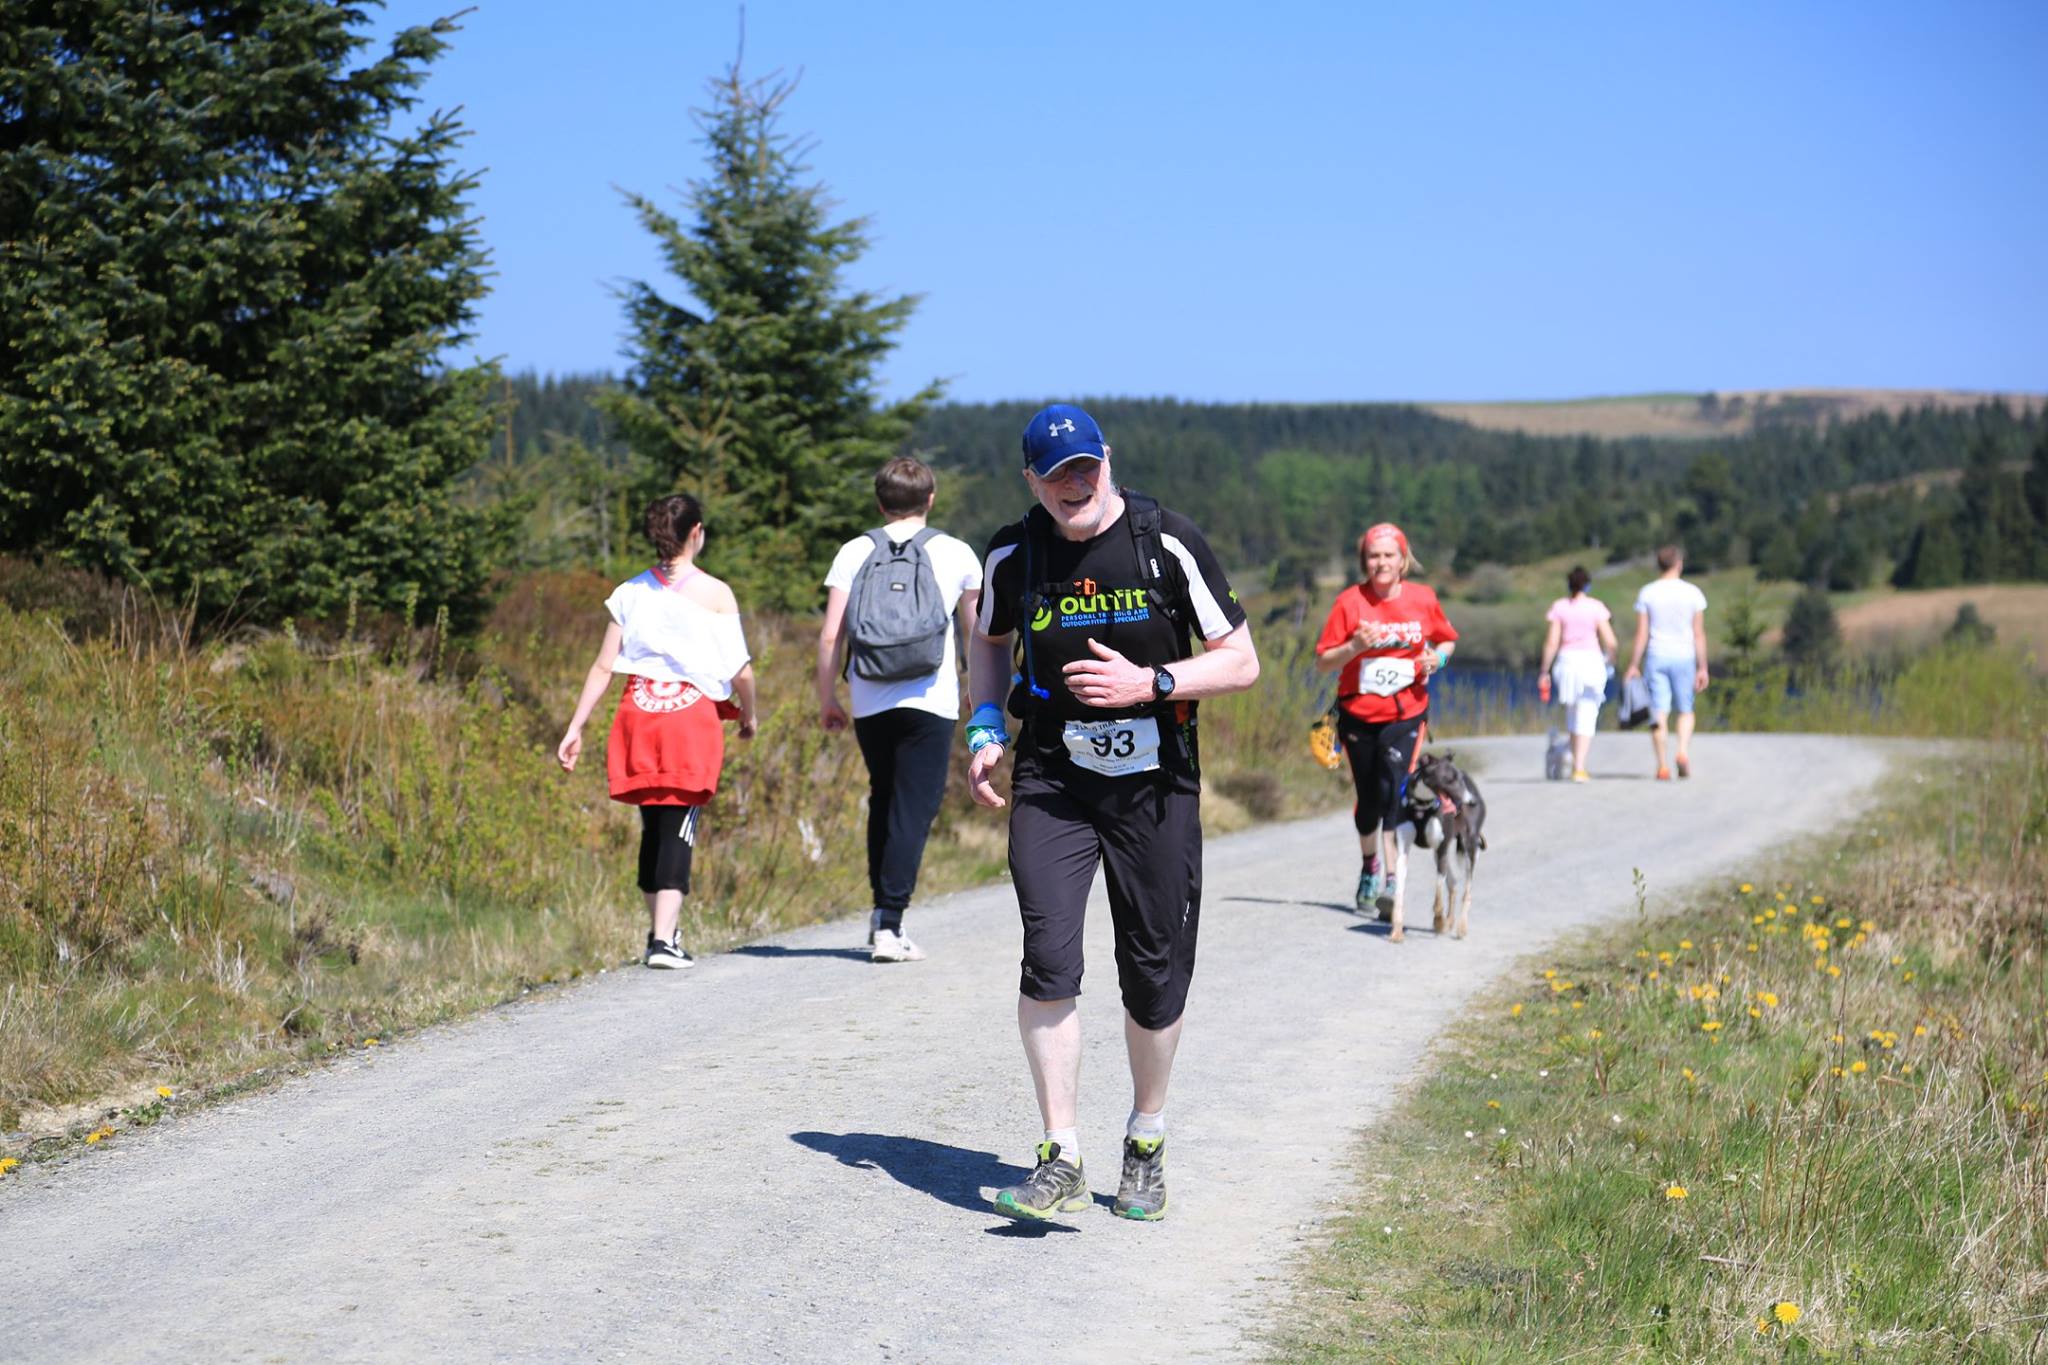 The 2 lakes Trail Races